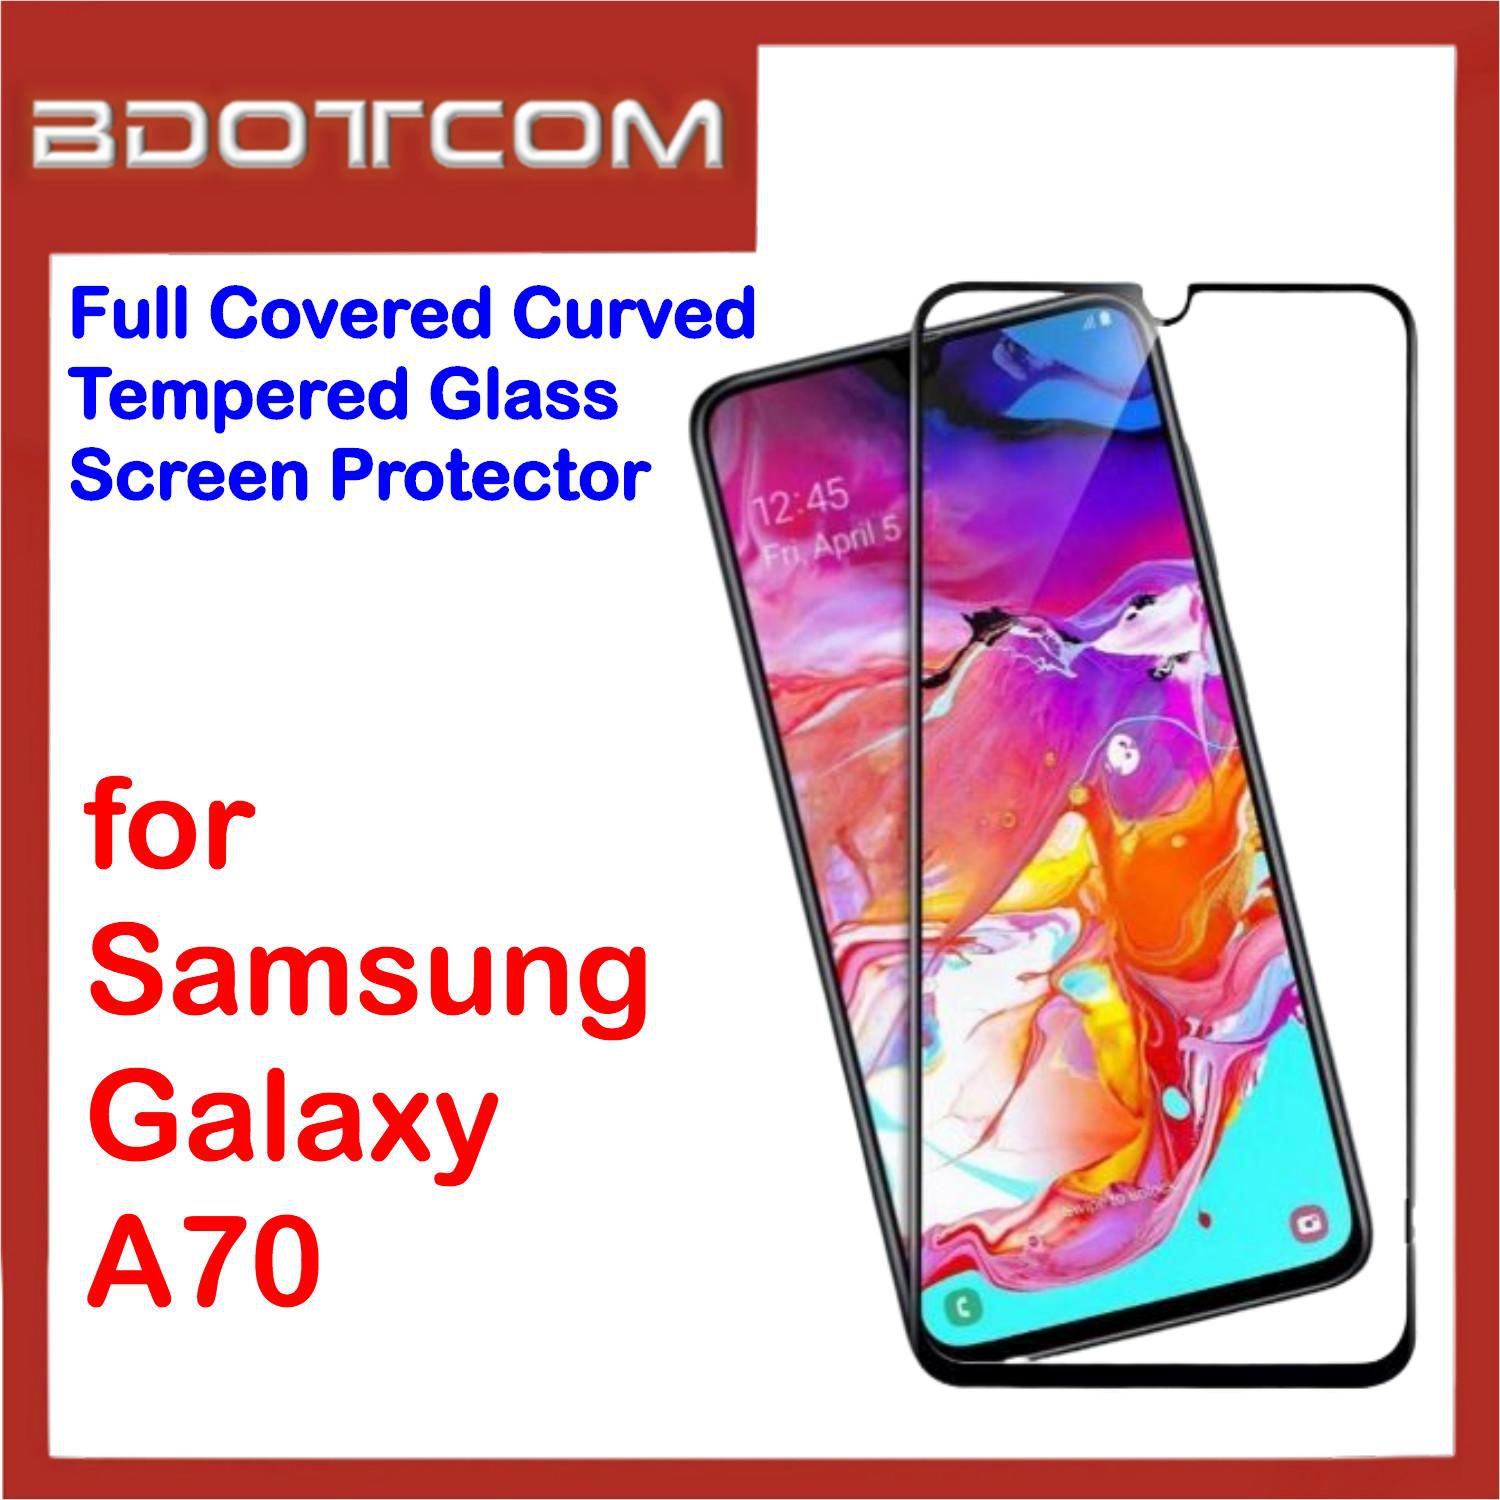 Bdotcom Full Covered Curved Glass Screen Protector for Samsung Galaxy A70 (Black)